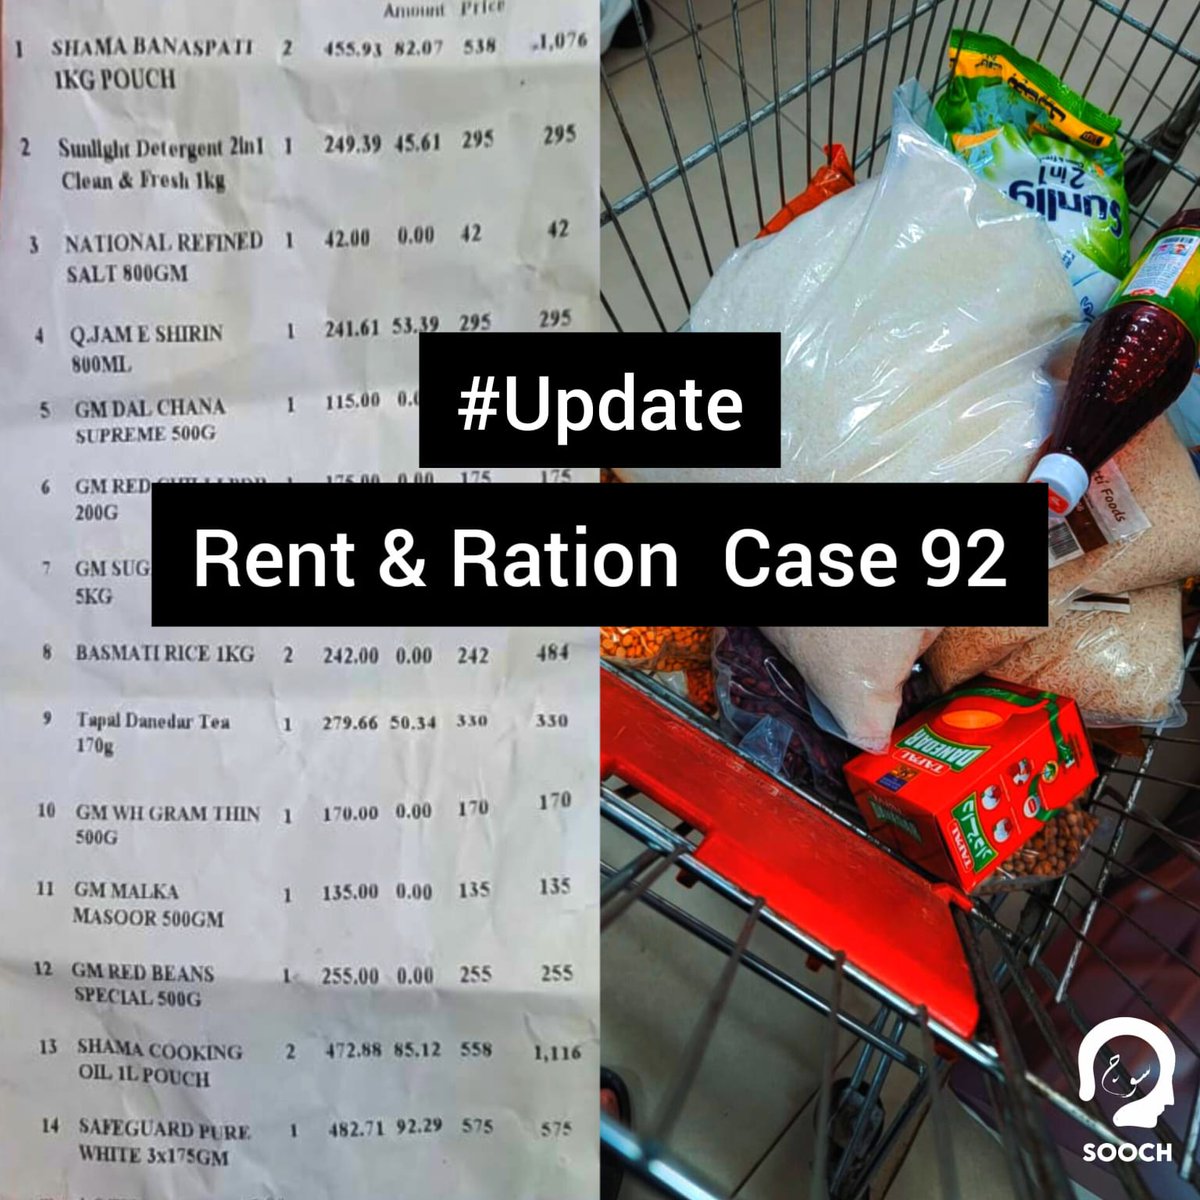 #Update
#Case_92

Alhamdulillah ! By Almighty's help and your kind support,Ration has been purchased and delivered to the concerned family.

Thanks for contribution🌸
keep supporting us!

#Sooch
#Humanitycomesfirst